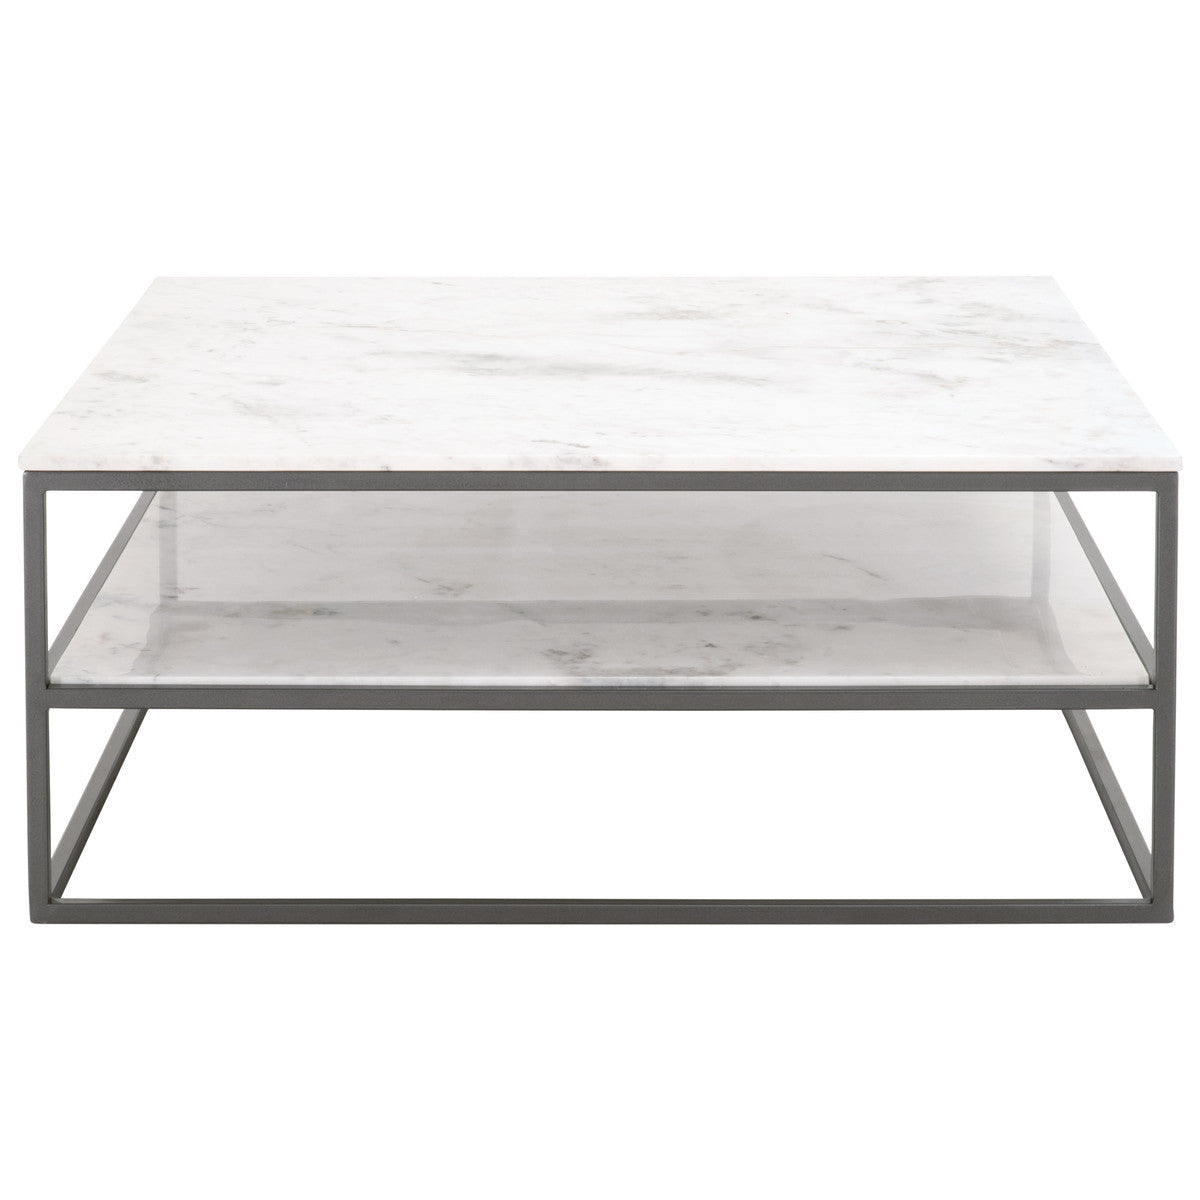 San Clemente Square Coffee Table